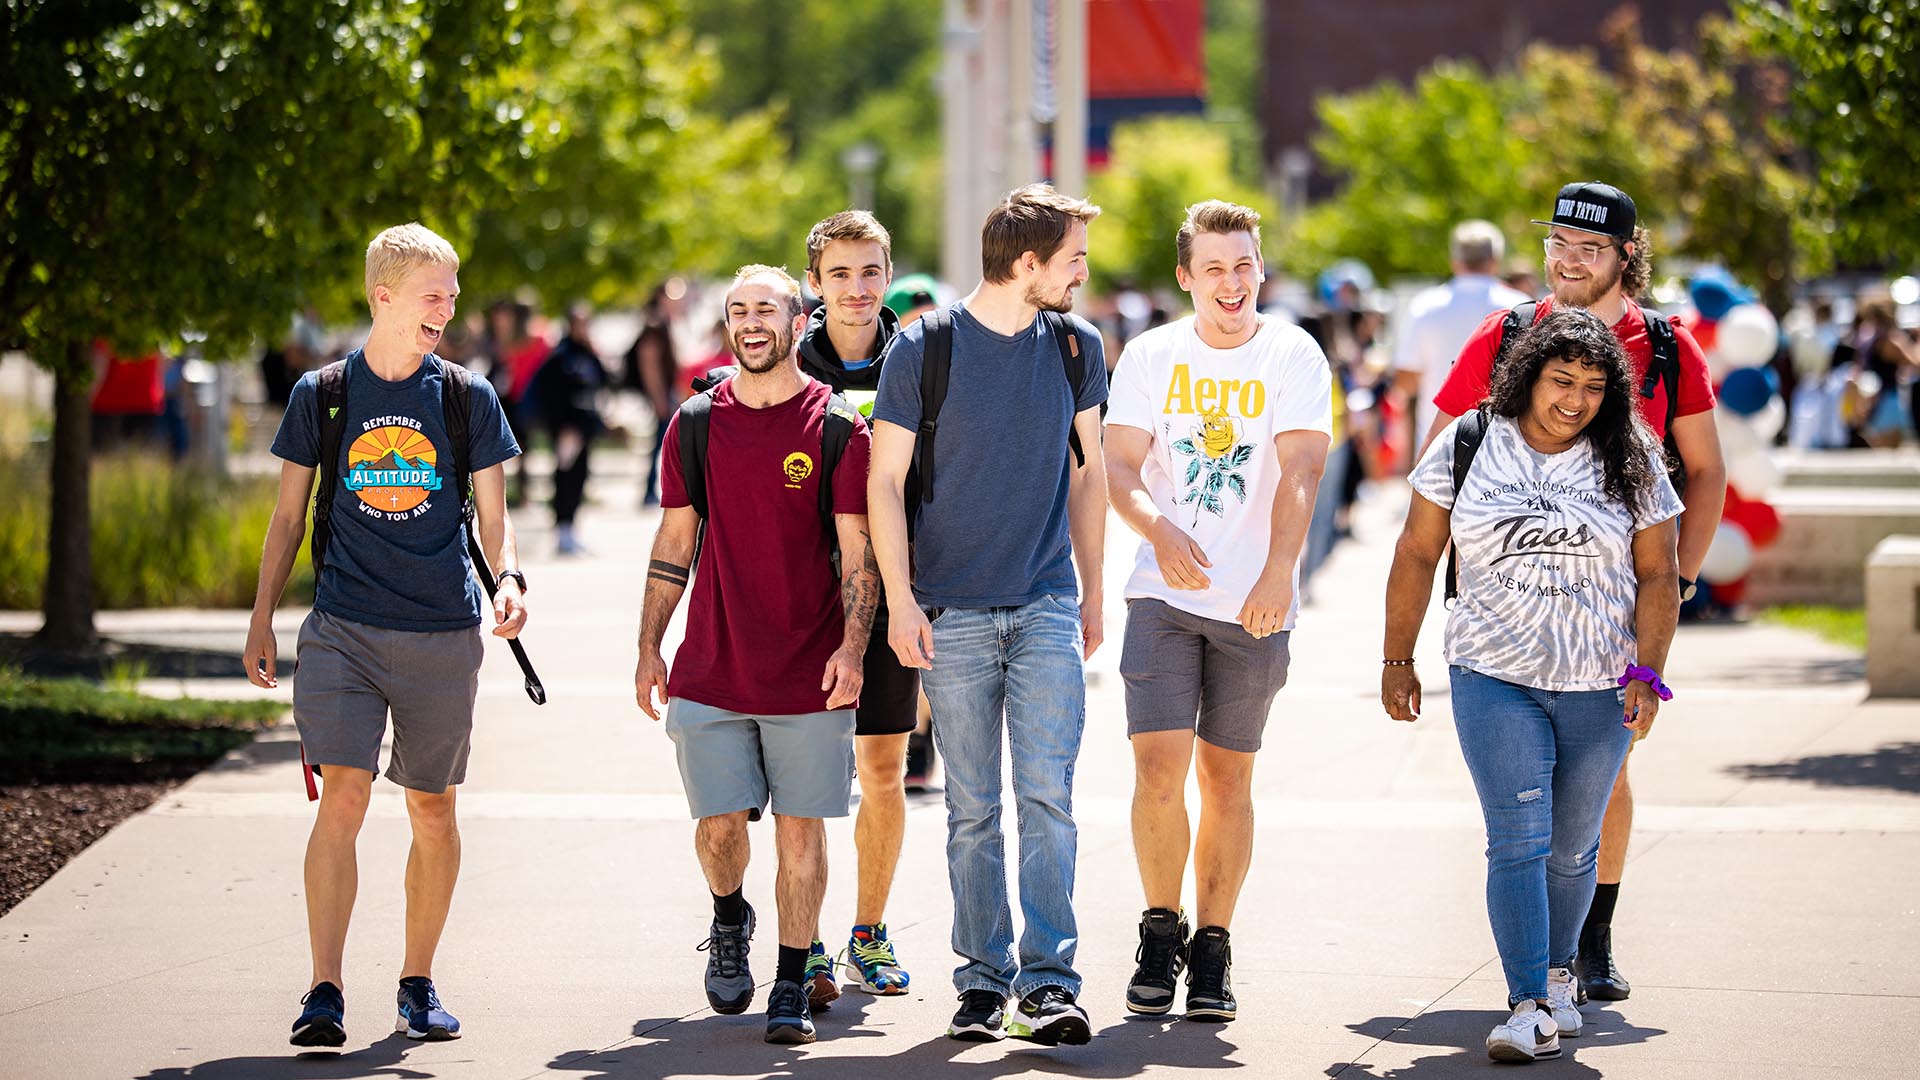 Students on campus smiling